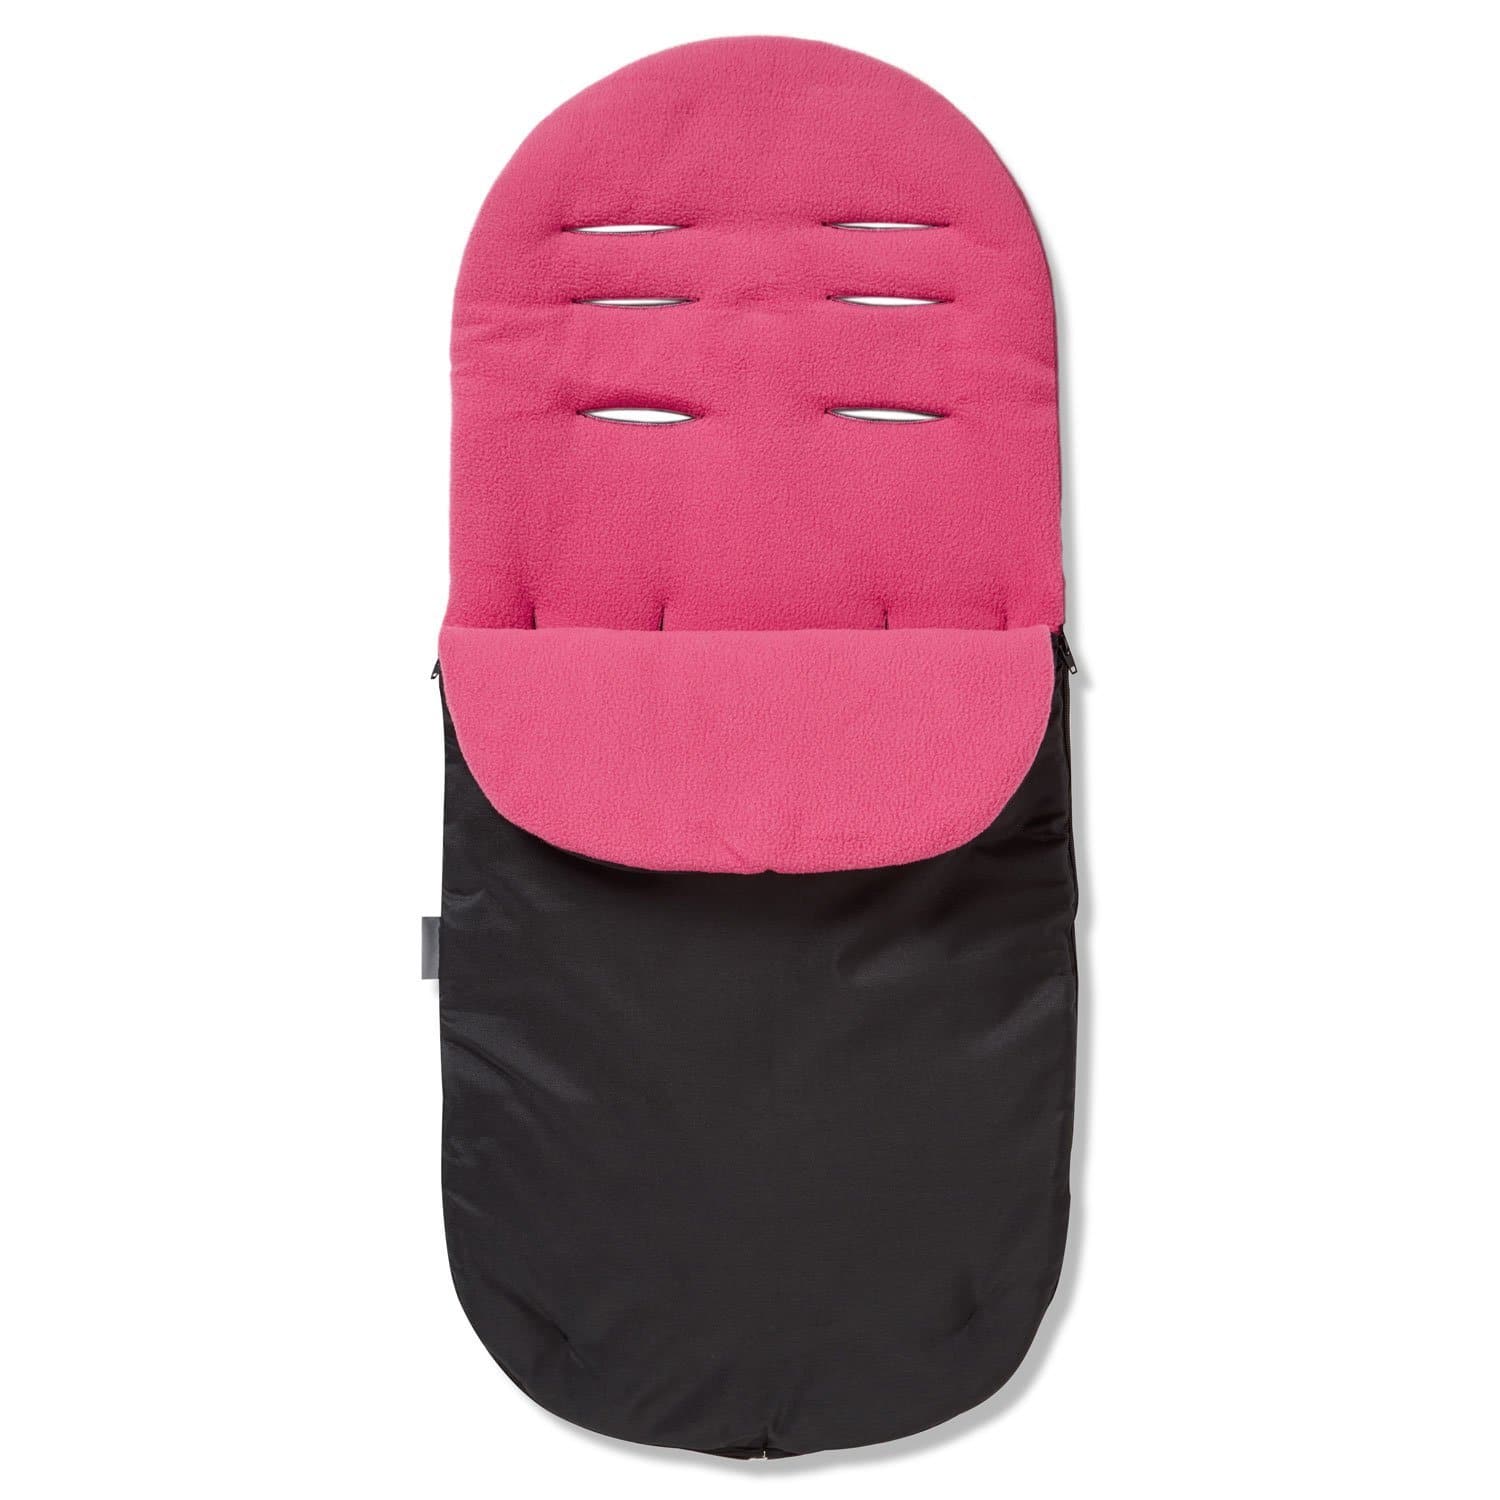 Footmuff / Cosy Toes Compatible with Baby Elegance - Dark Pink / Fits All Models | For Your Little One